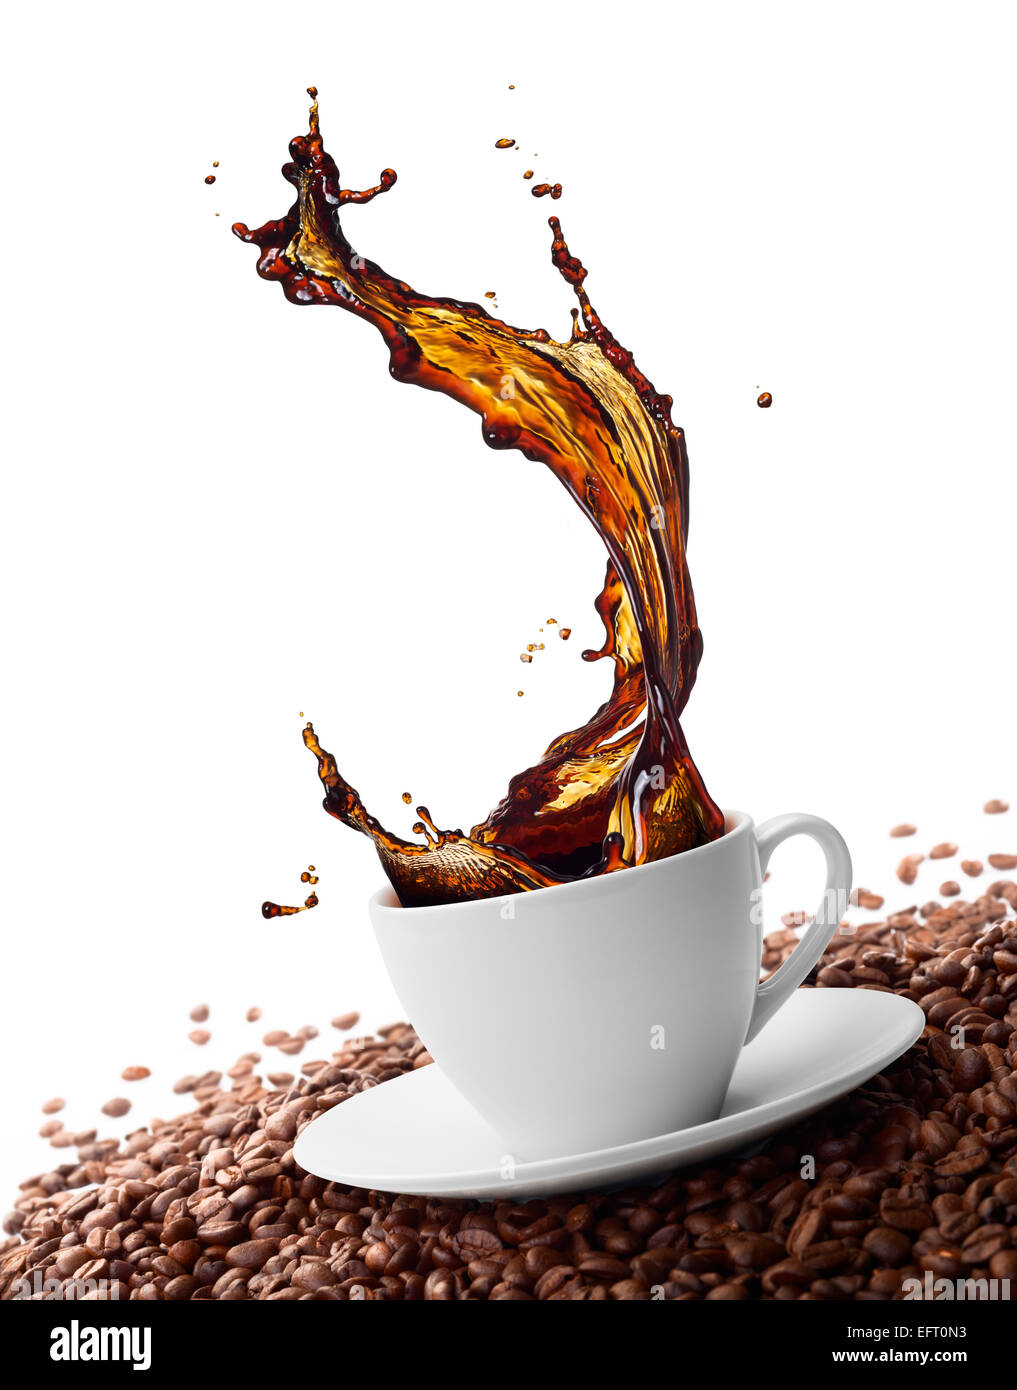 cup of coffee with splash surrounded by coffee beans Stock Photo